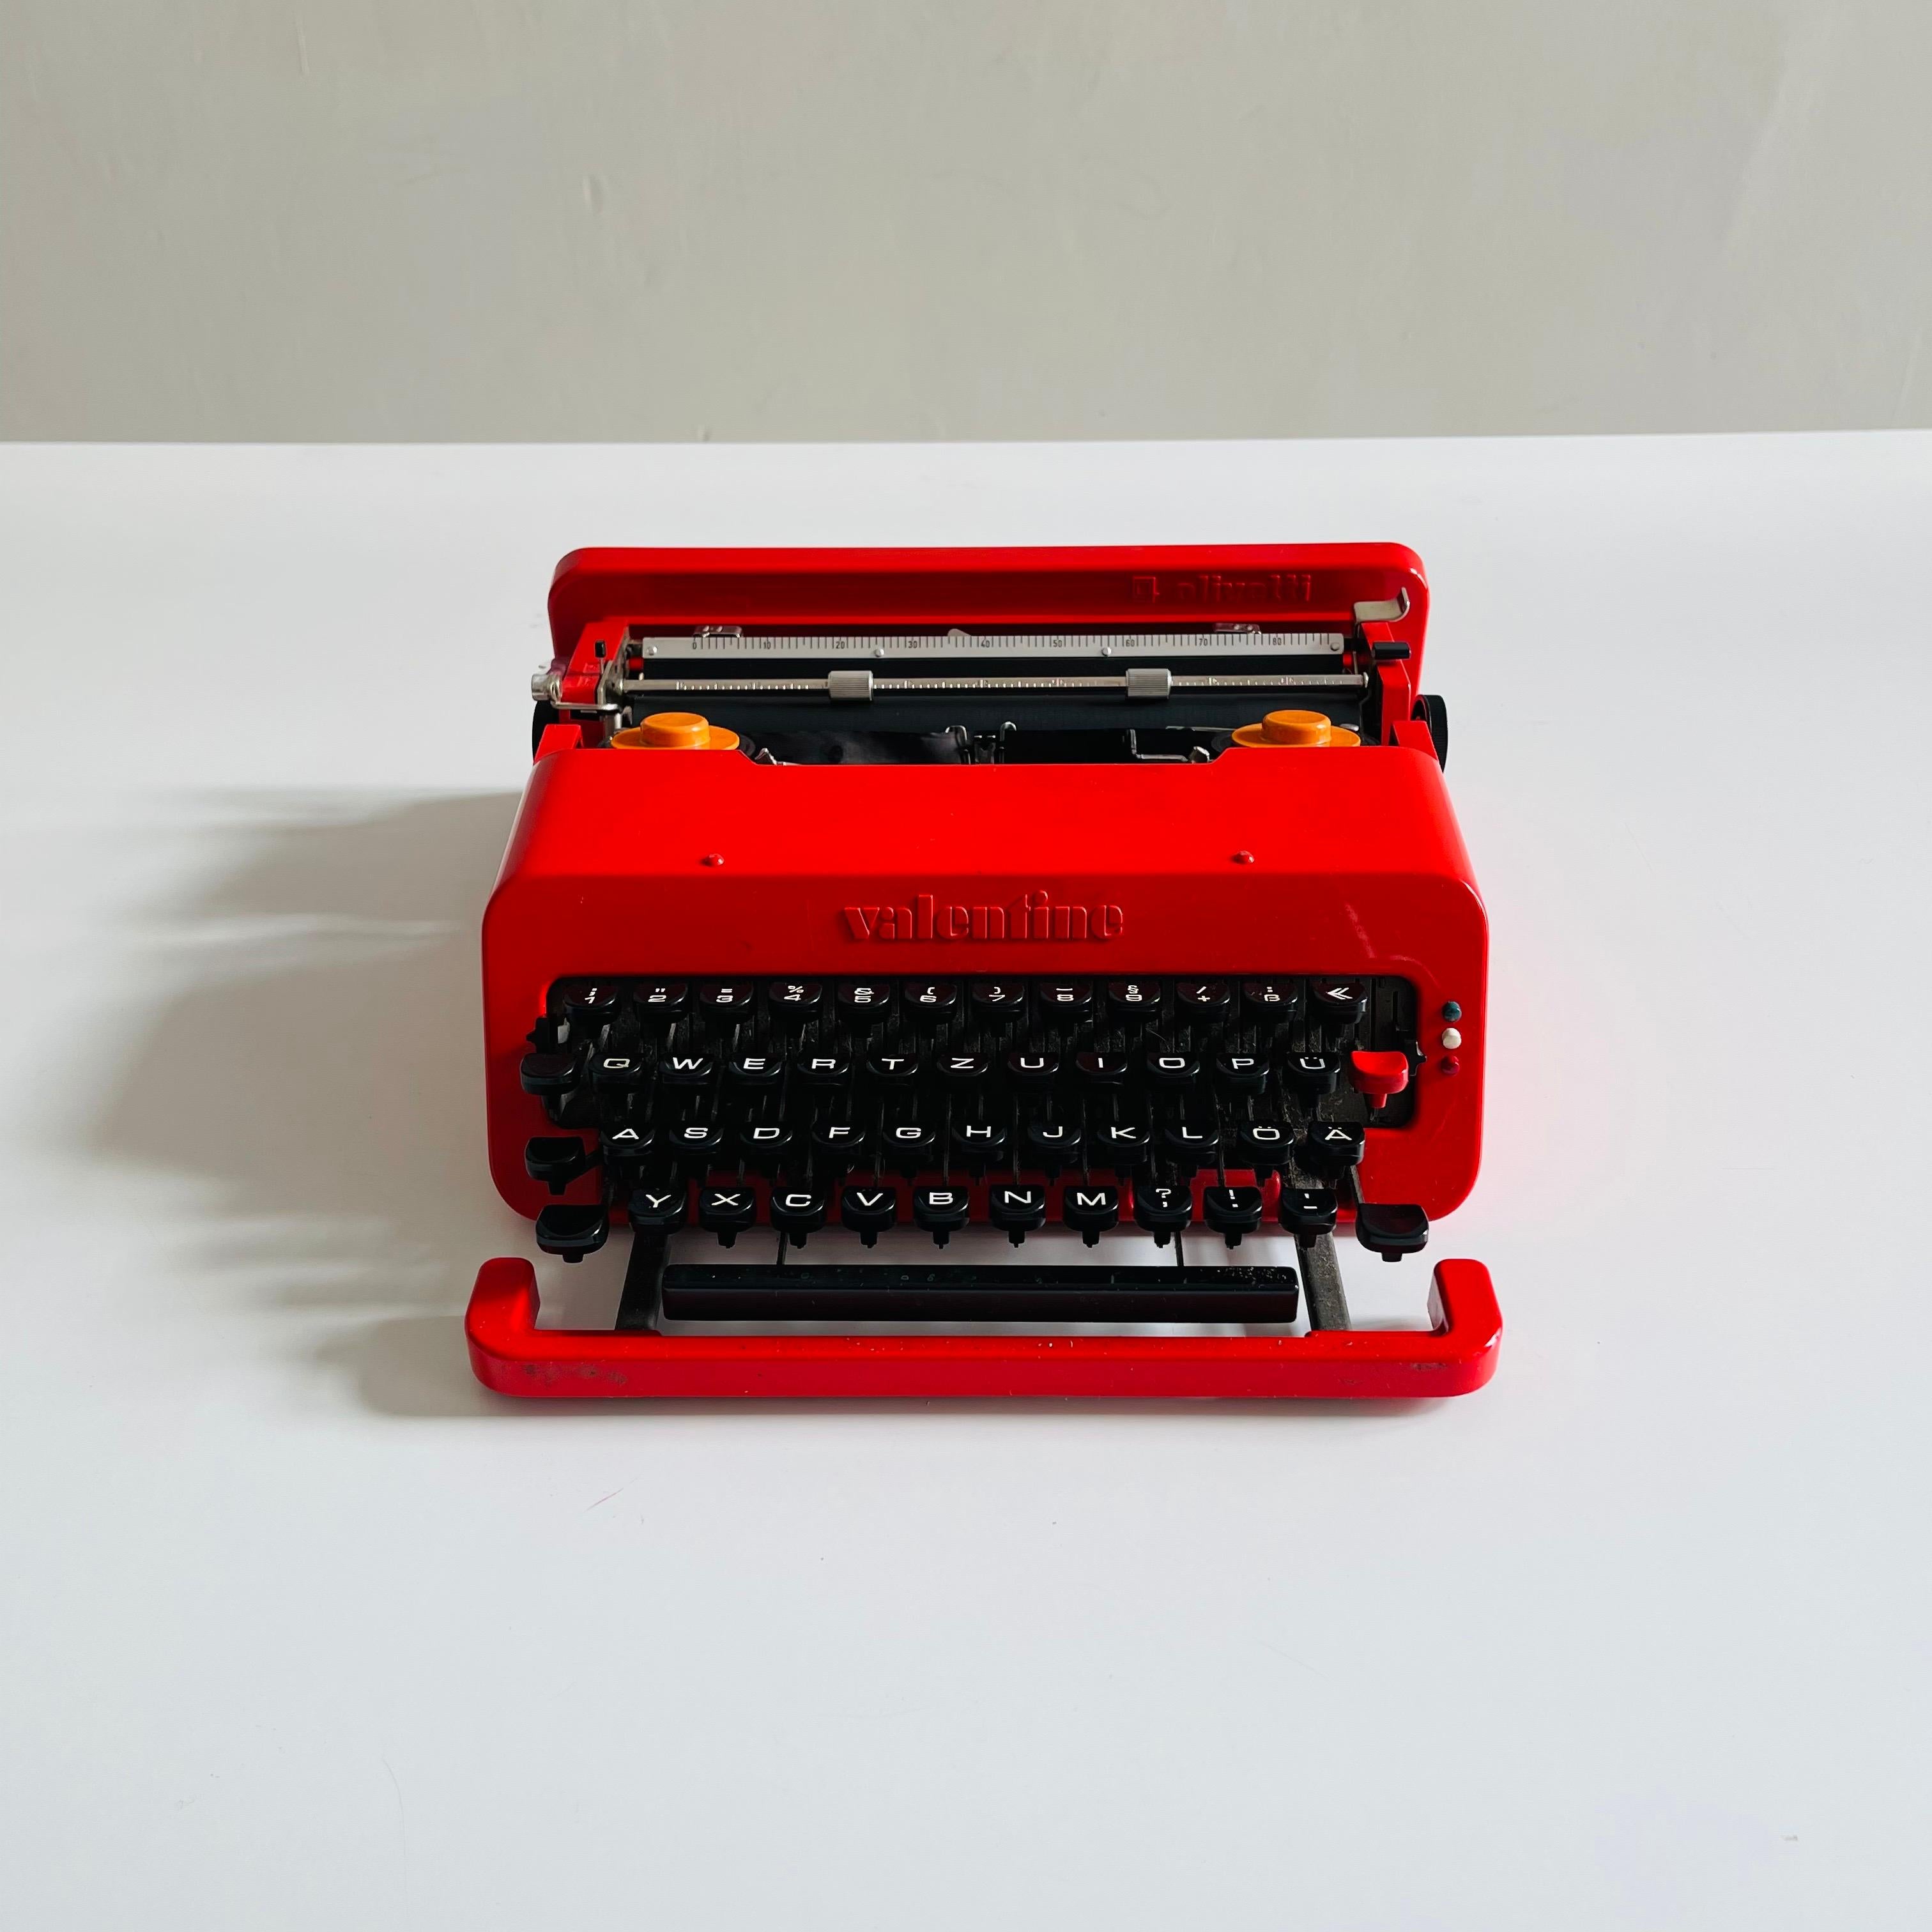 Ettore Sottsass Valentine Portable Typewriter for Olivetti, 1968 In Good Condition For Sale In Vienna, AT